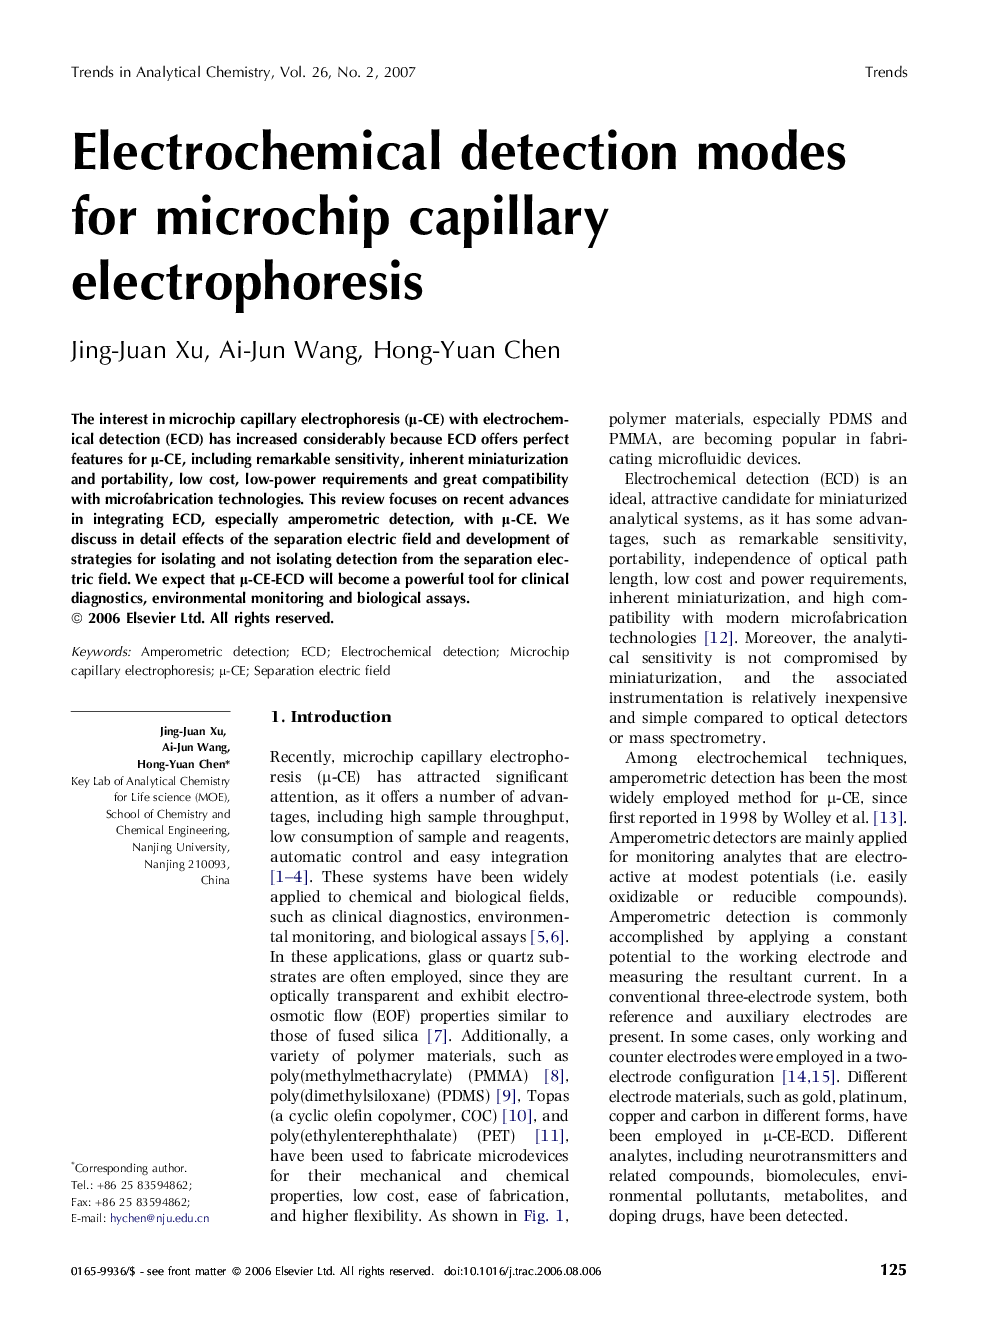 Electrochemical detection modes for microchip capillary electrophoresis